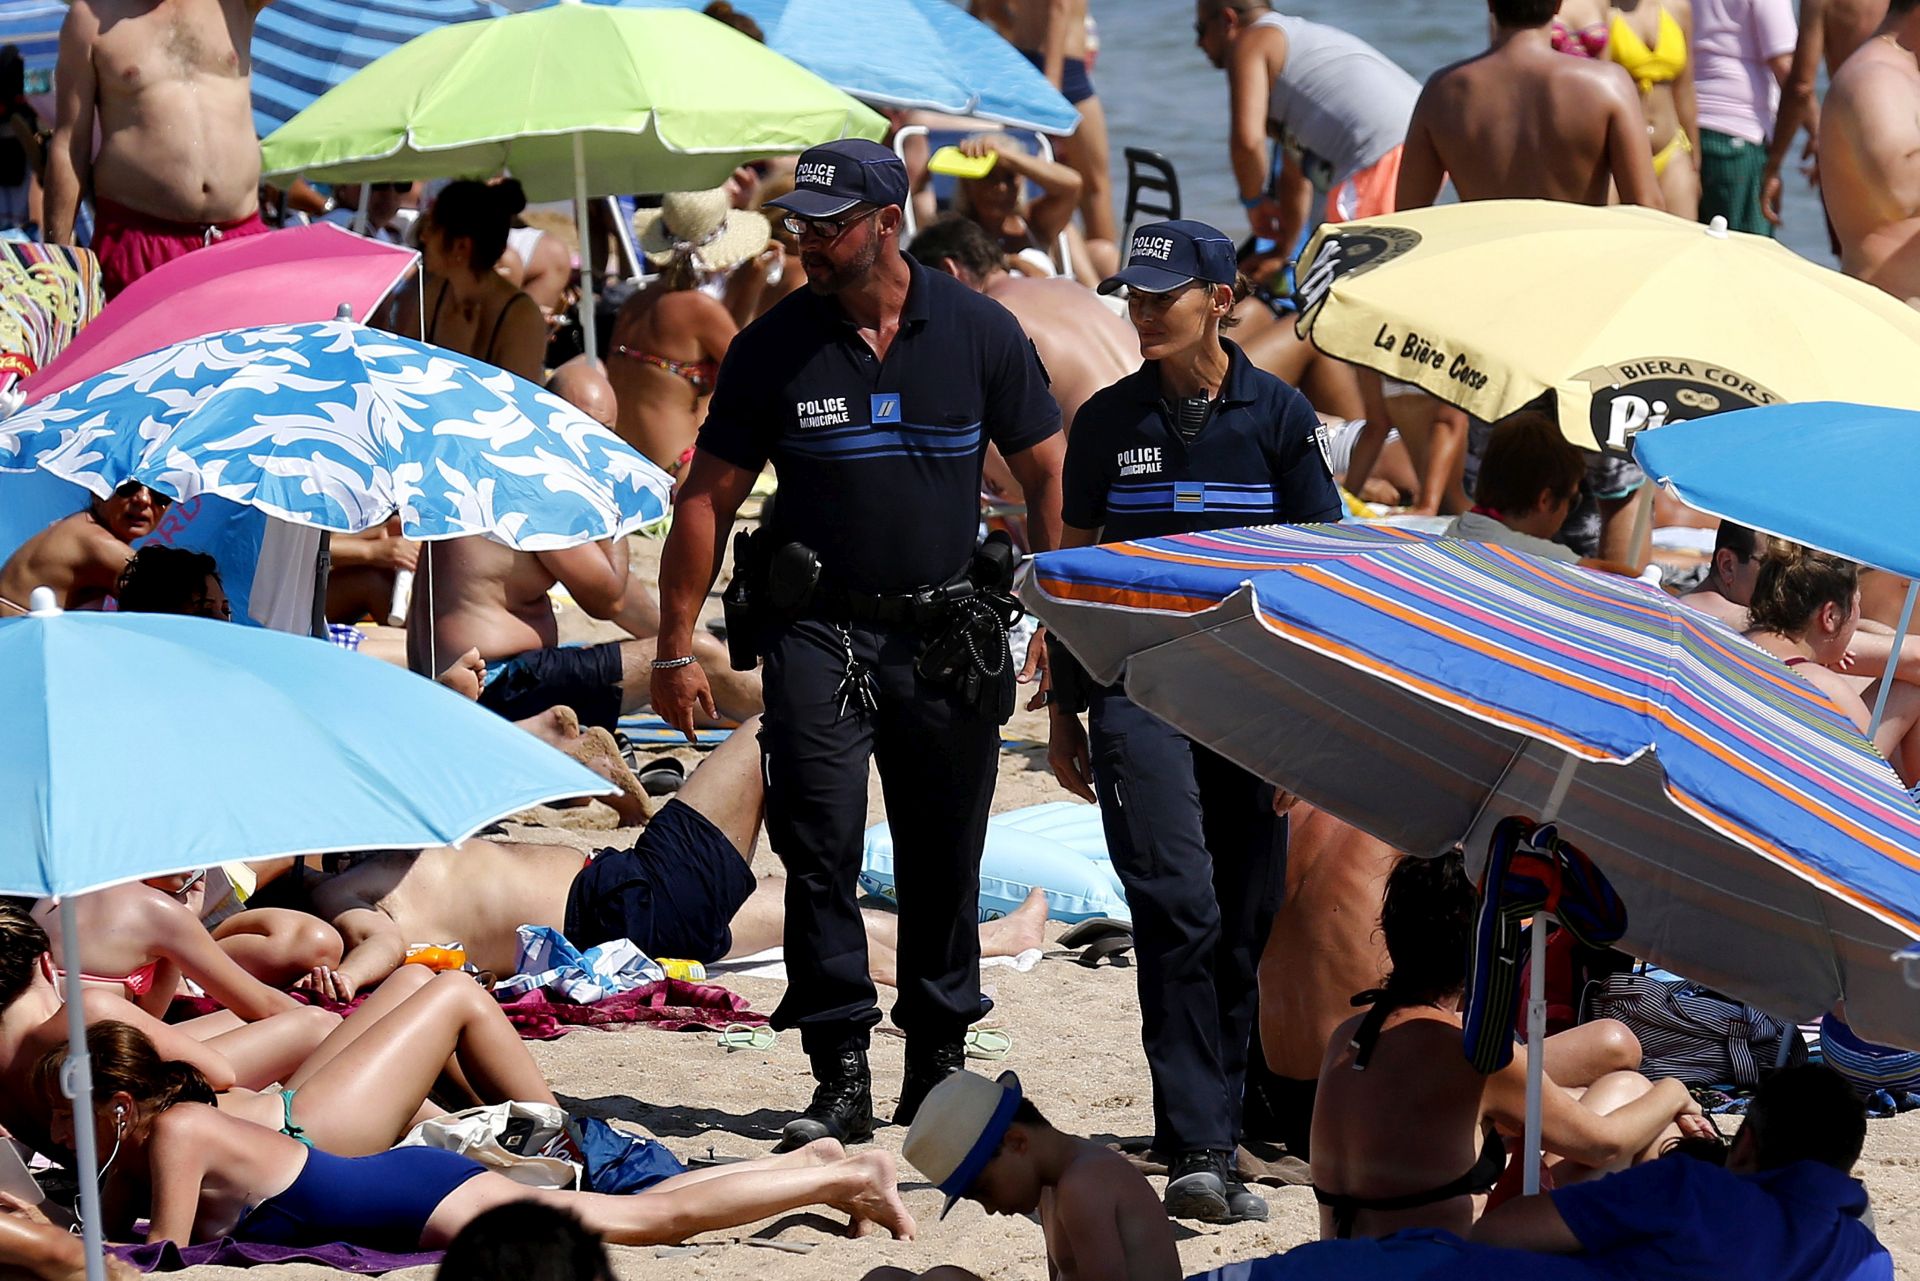 epa05454975 French police officers patrol on the beach of Cannes, in security measures after the Nice terror attack, in Cannes, France, 04 August 2016.  EPA/SEBASTIEN NOGIER